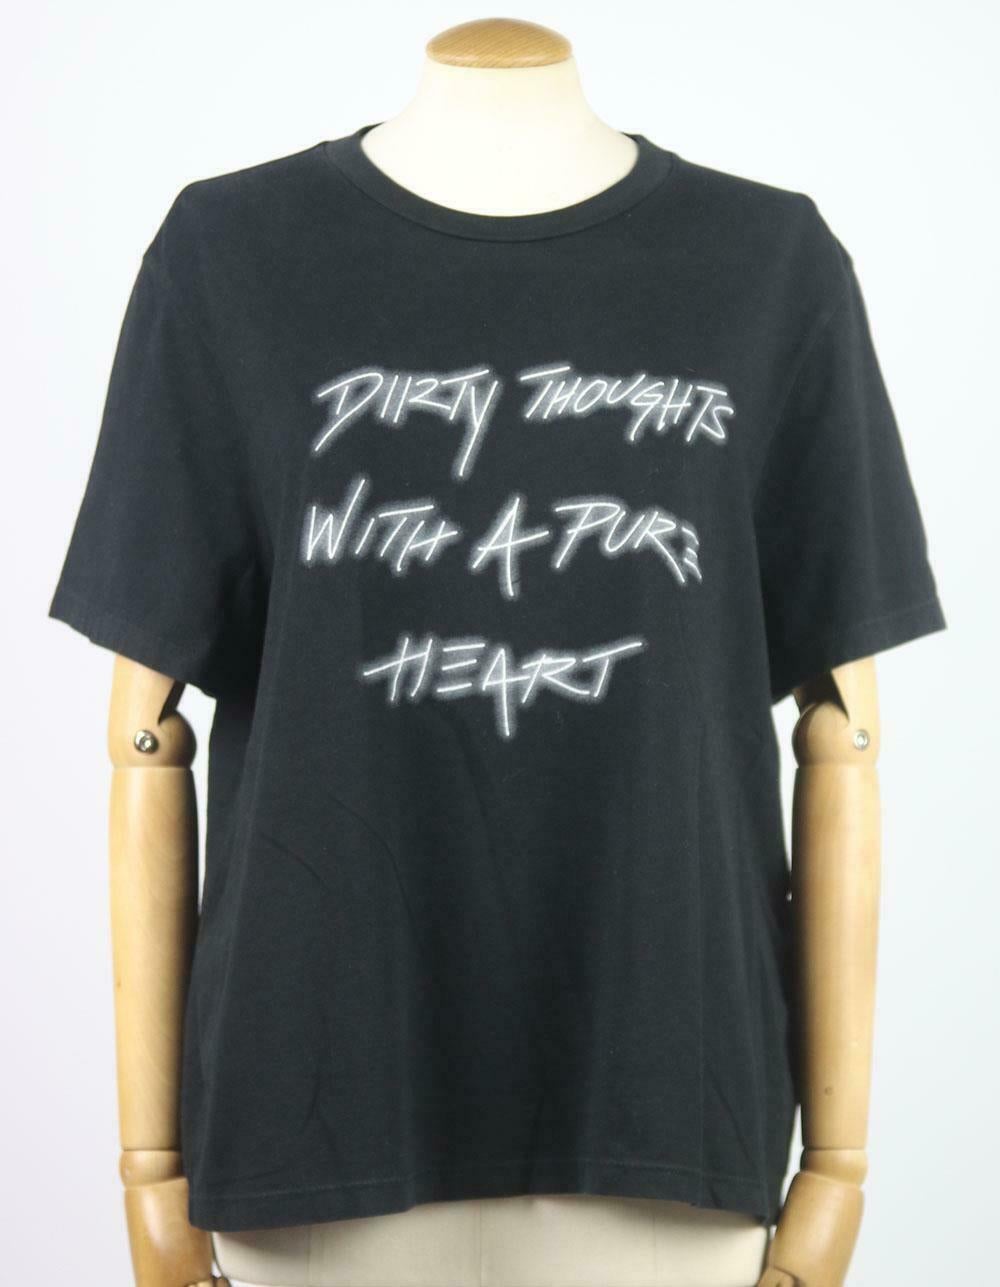 Amiri's T-shirt is printed with the house's iconic design - 'Dirty Thoughts with a pure heart' in a graphic typeface, it's made from black cotton-jersey and is cut for a relaxed fit with slightly elongated sleeves that are perfect for rolling.
Black